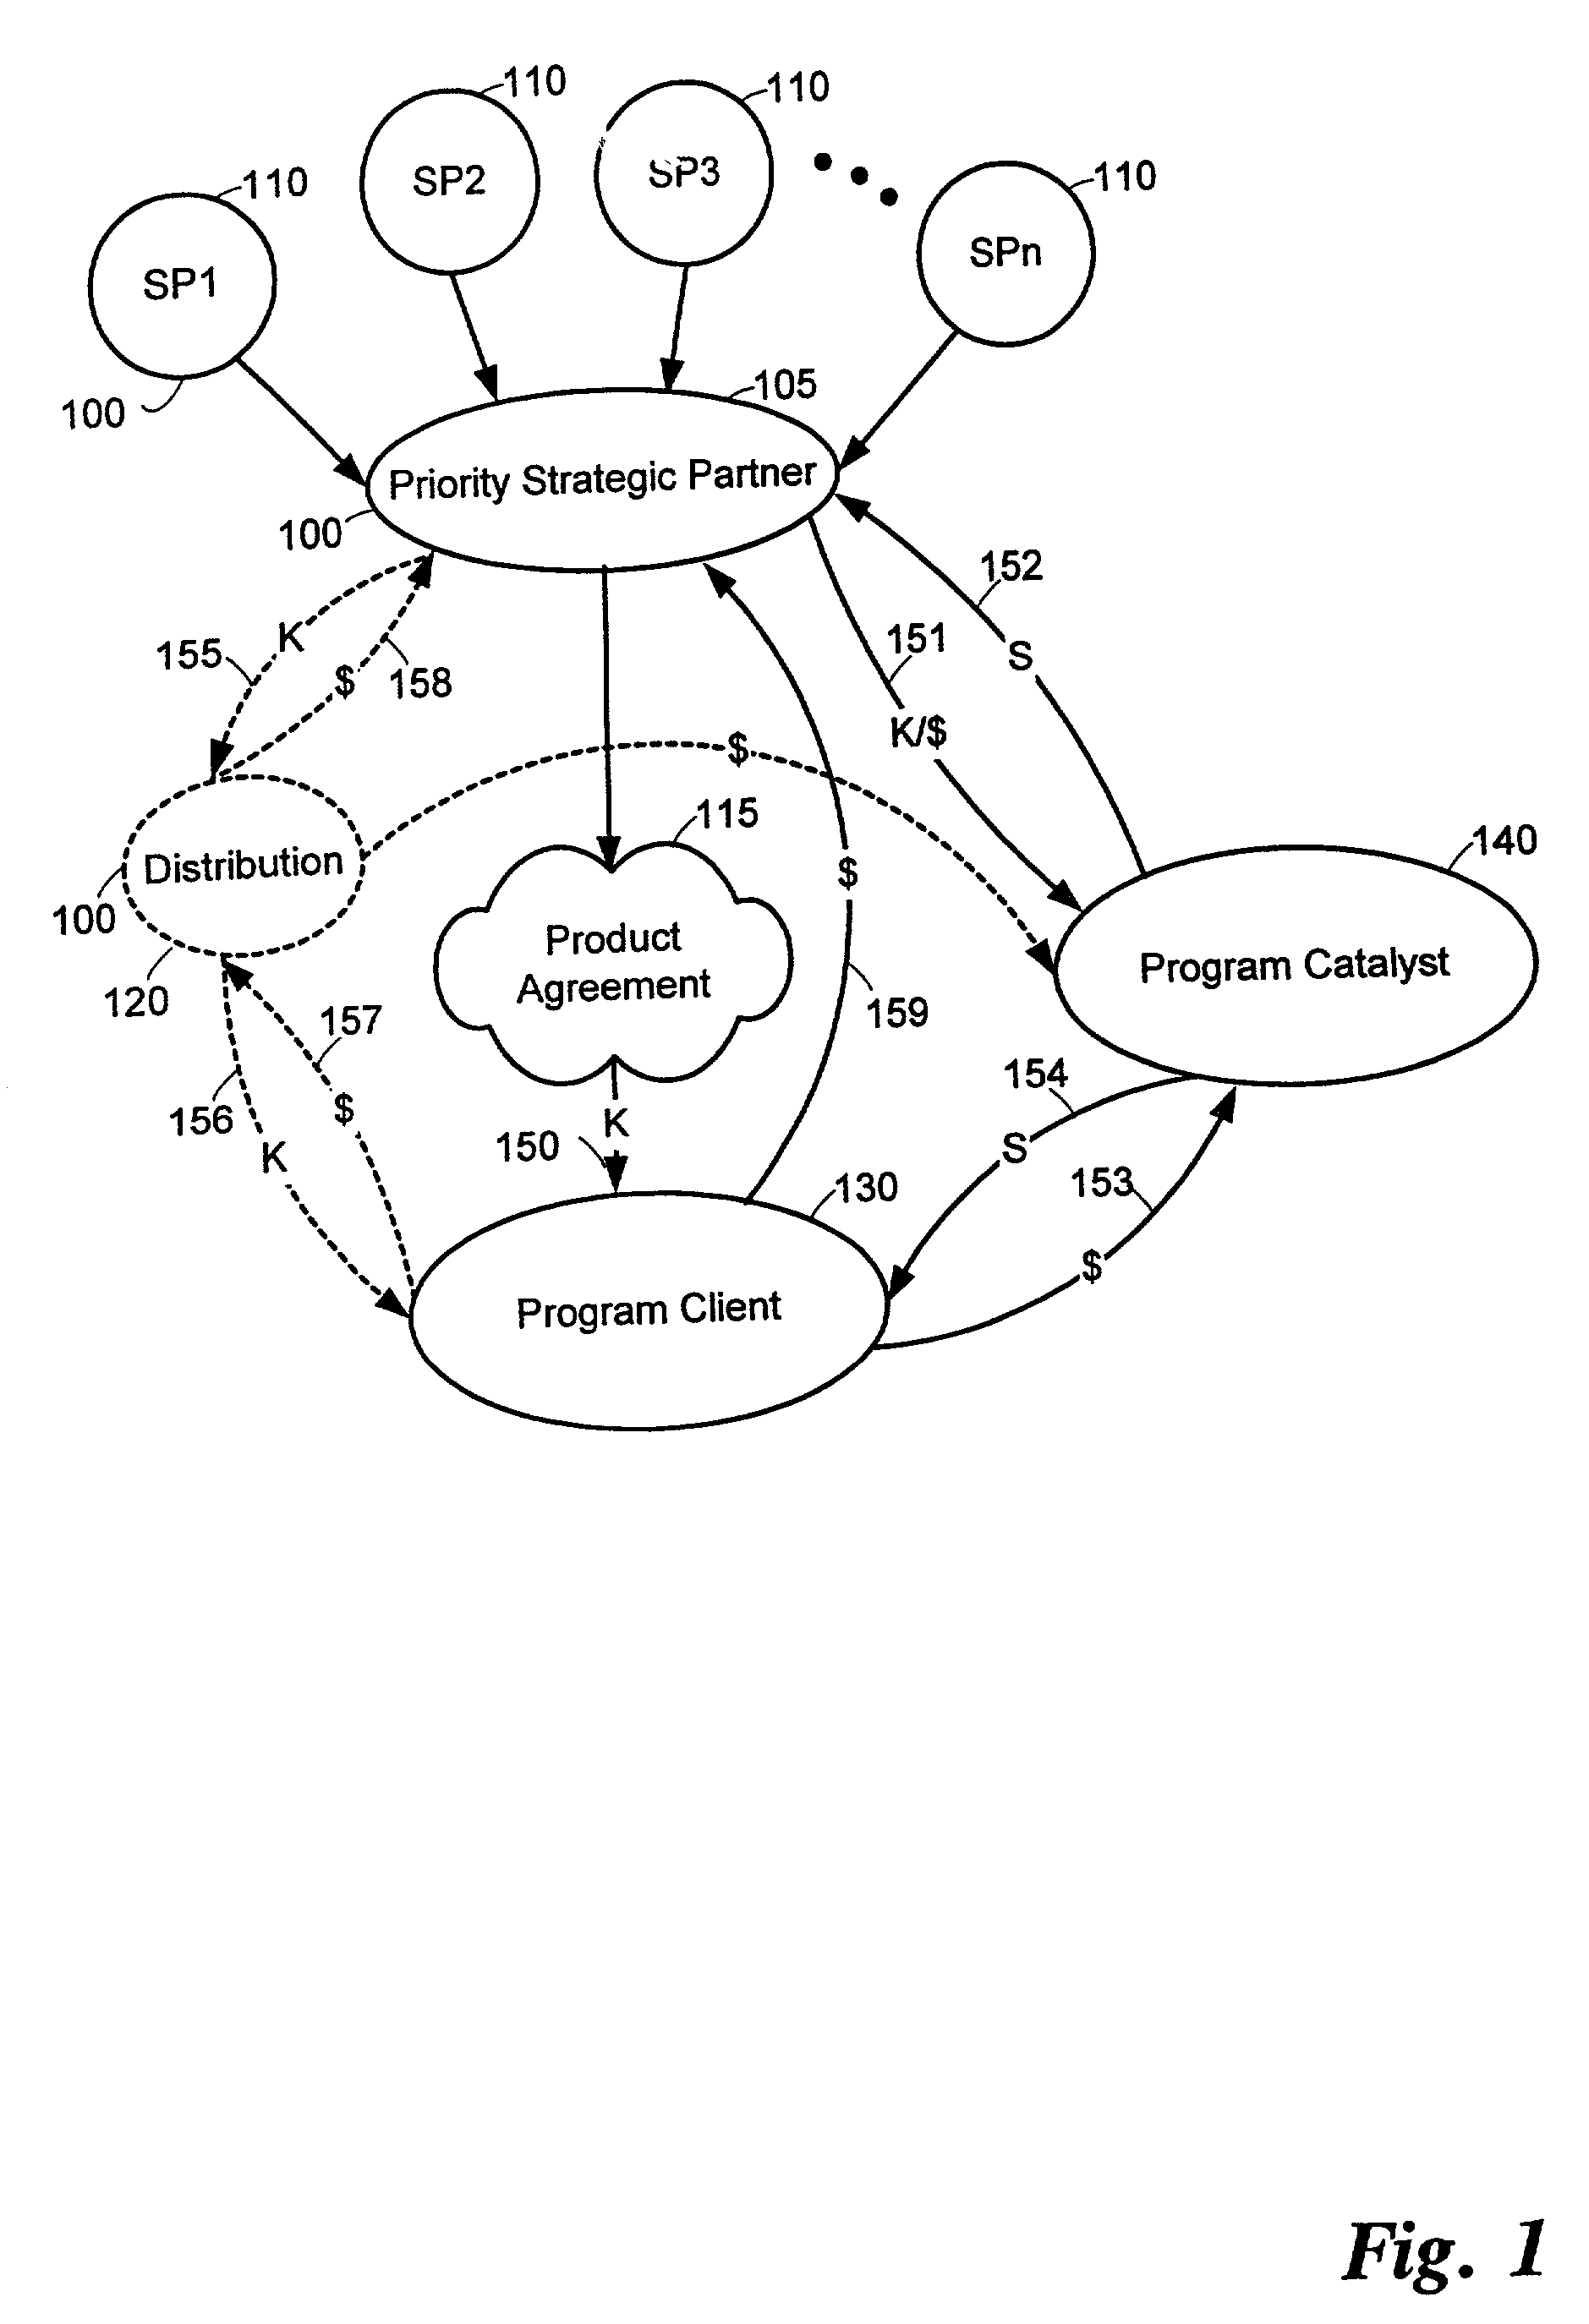 System and method for improving the operation of a business entity and monitoring and reporting the results thereof